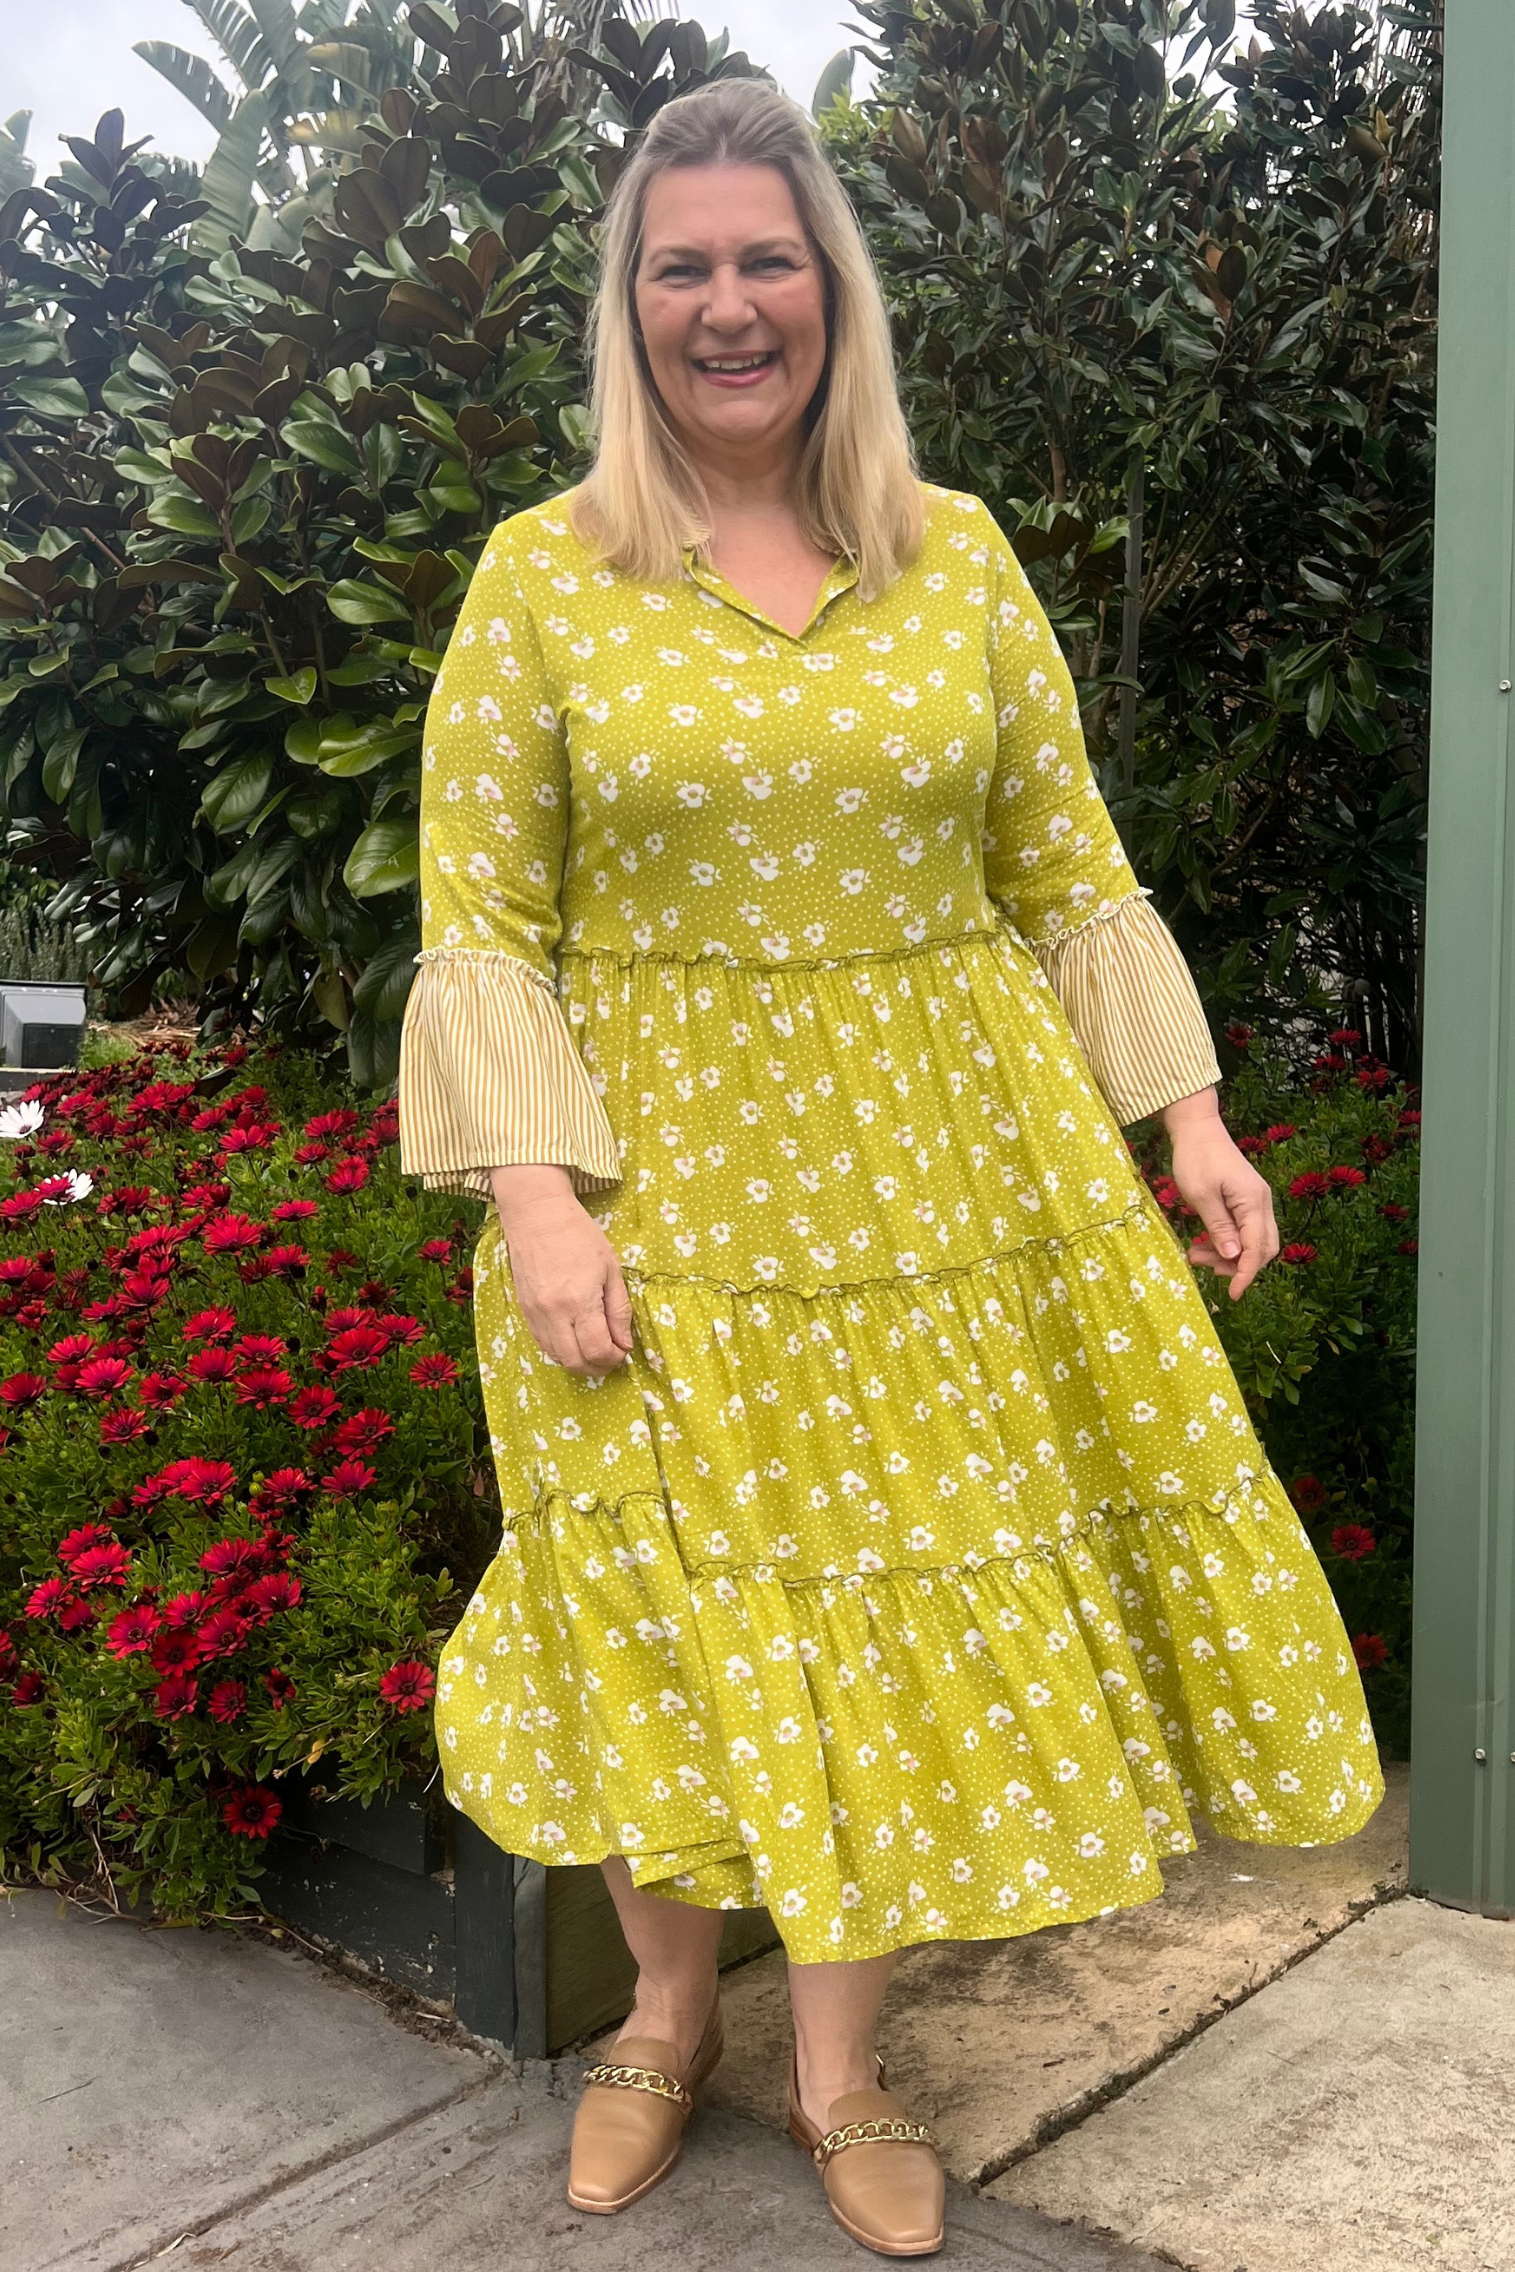 Kita Ku modelling a chartreuse floral layered dress in a garden setting. 